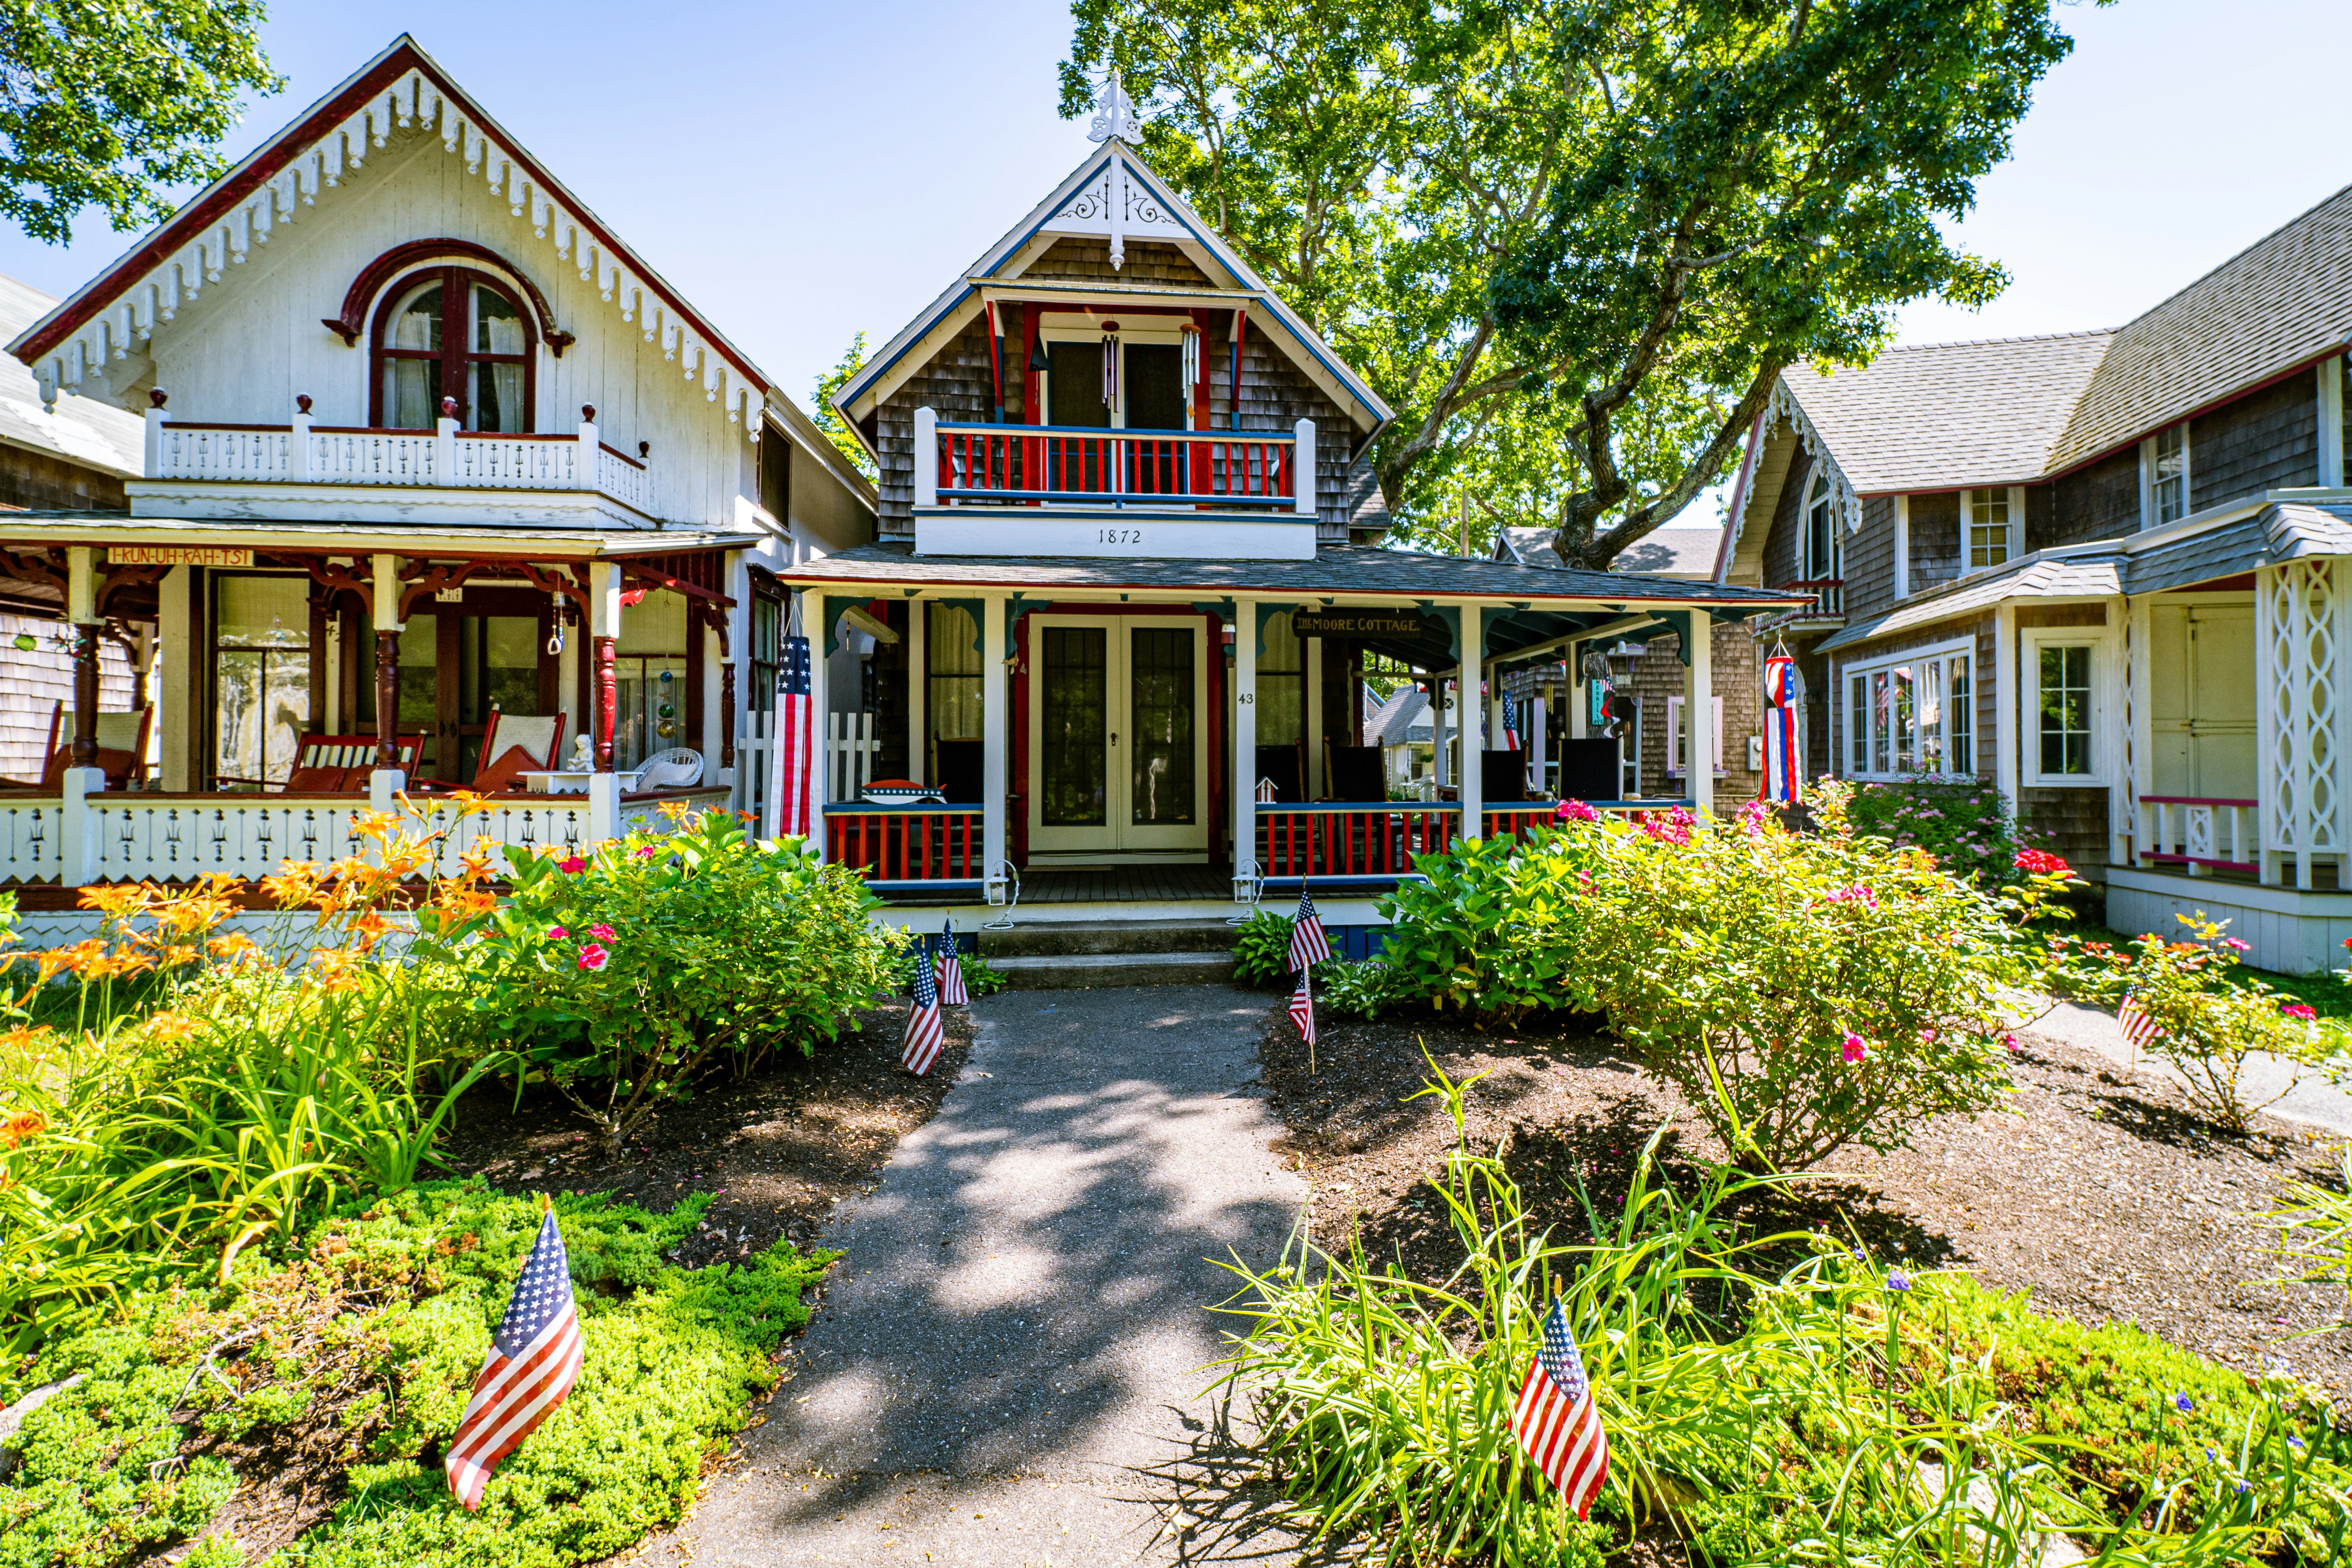 A stunning and very American (red, white and blue) cottage home on Martha's Vineyard. These gingerbread style house are very popular and we loved exploring them by riding around the town on bikes rented from our hotel.